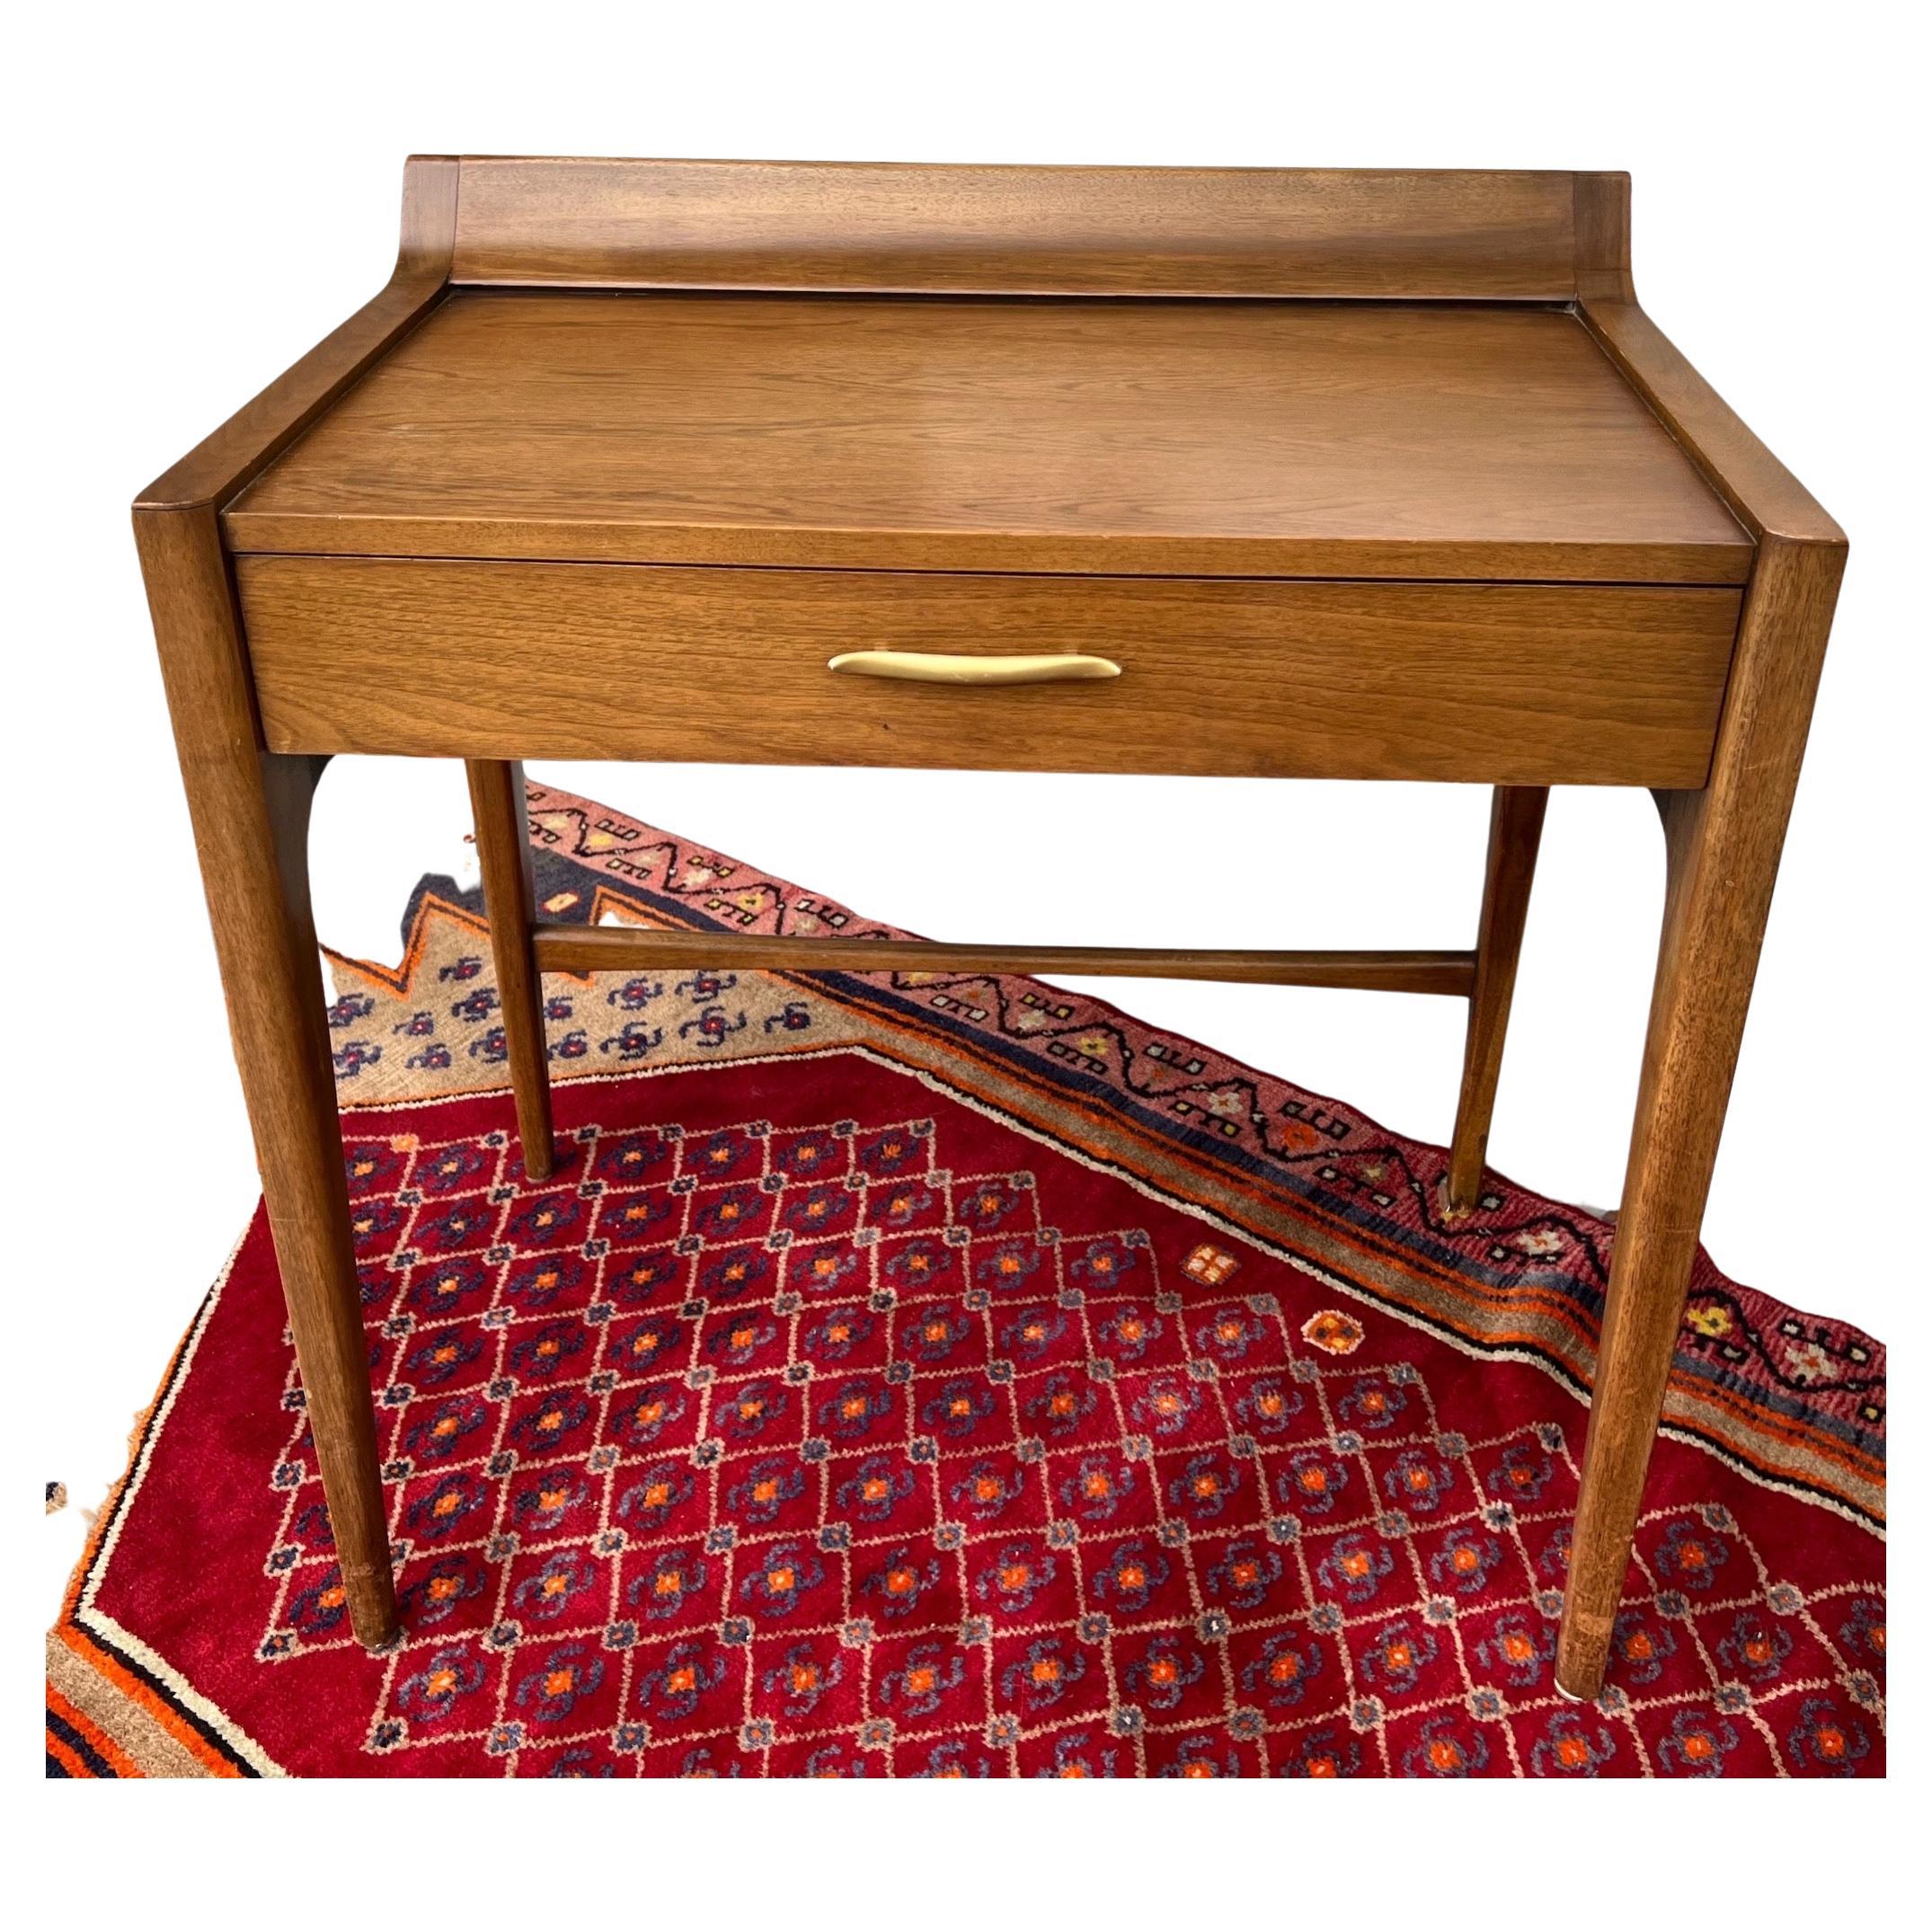 Drexel Profile Writing Desk or Entryway Table